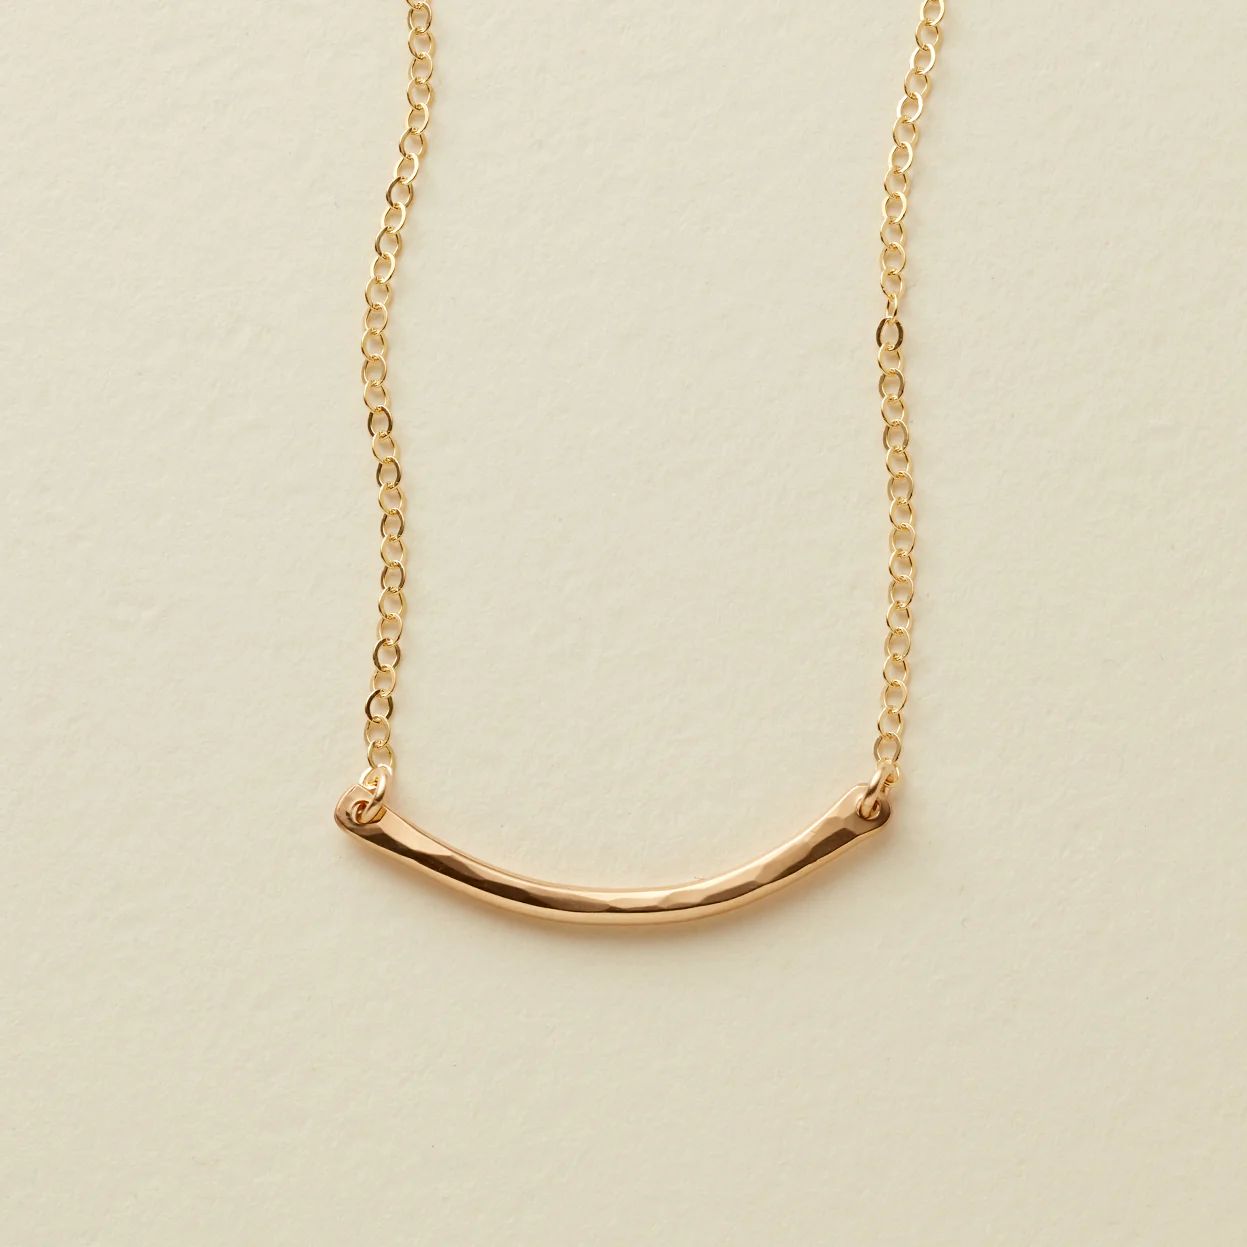 Mini Hammered Crescent Bar Necklace | Made by Mary (US)